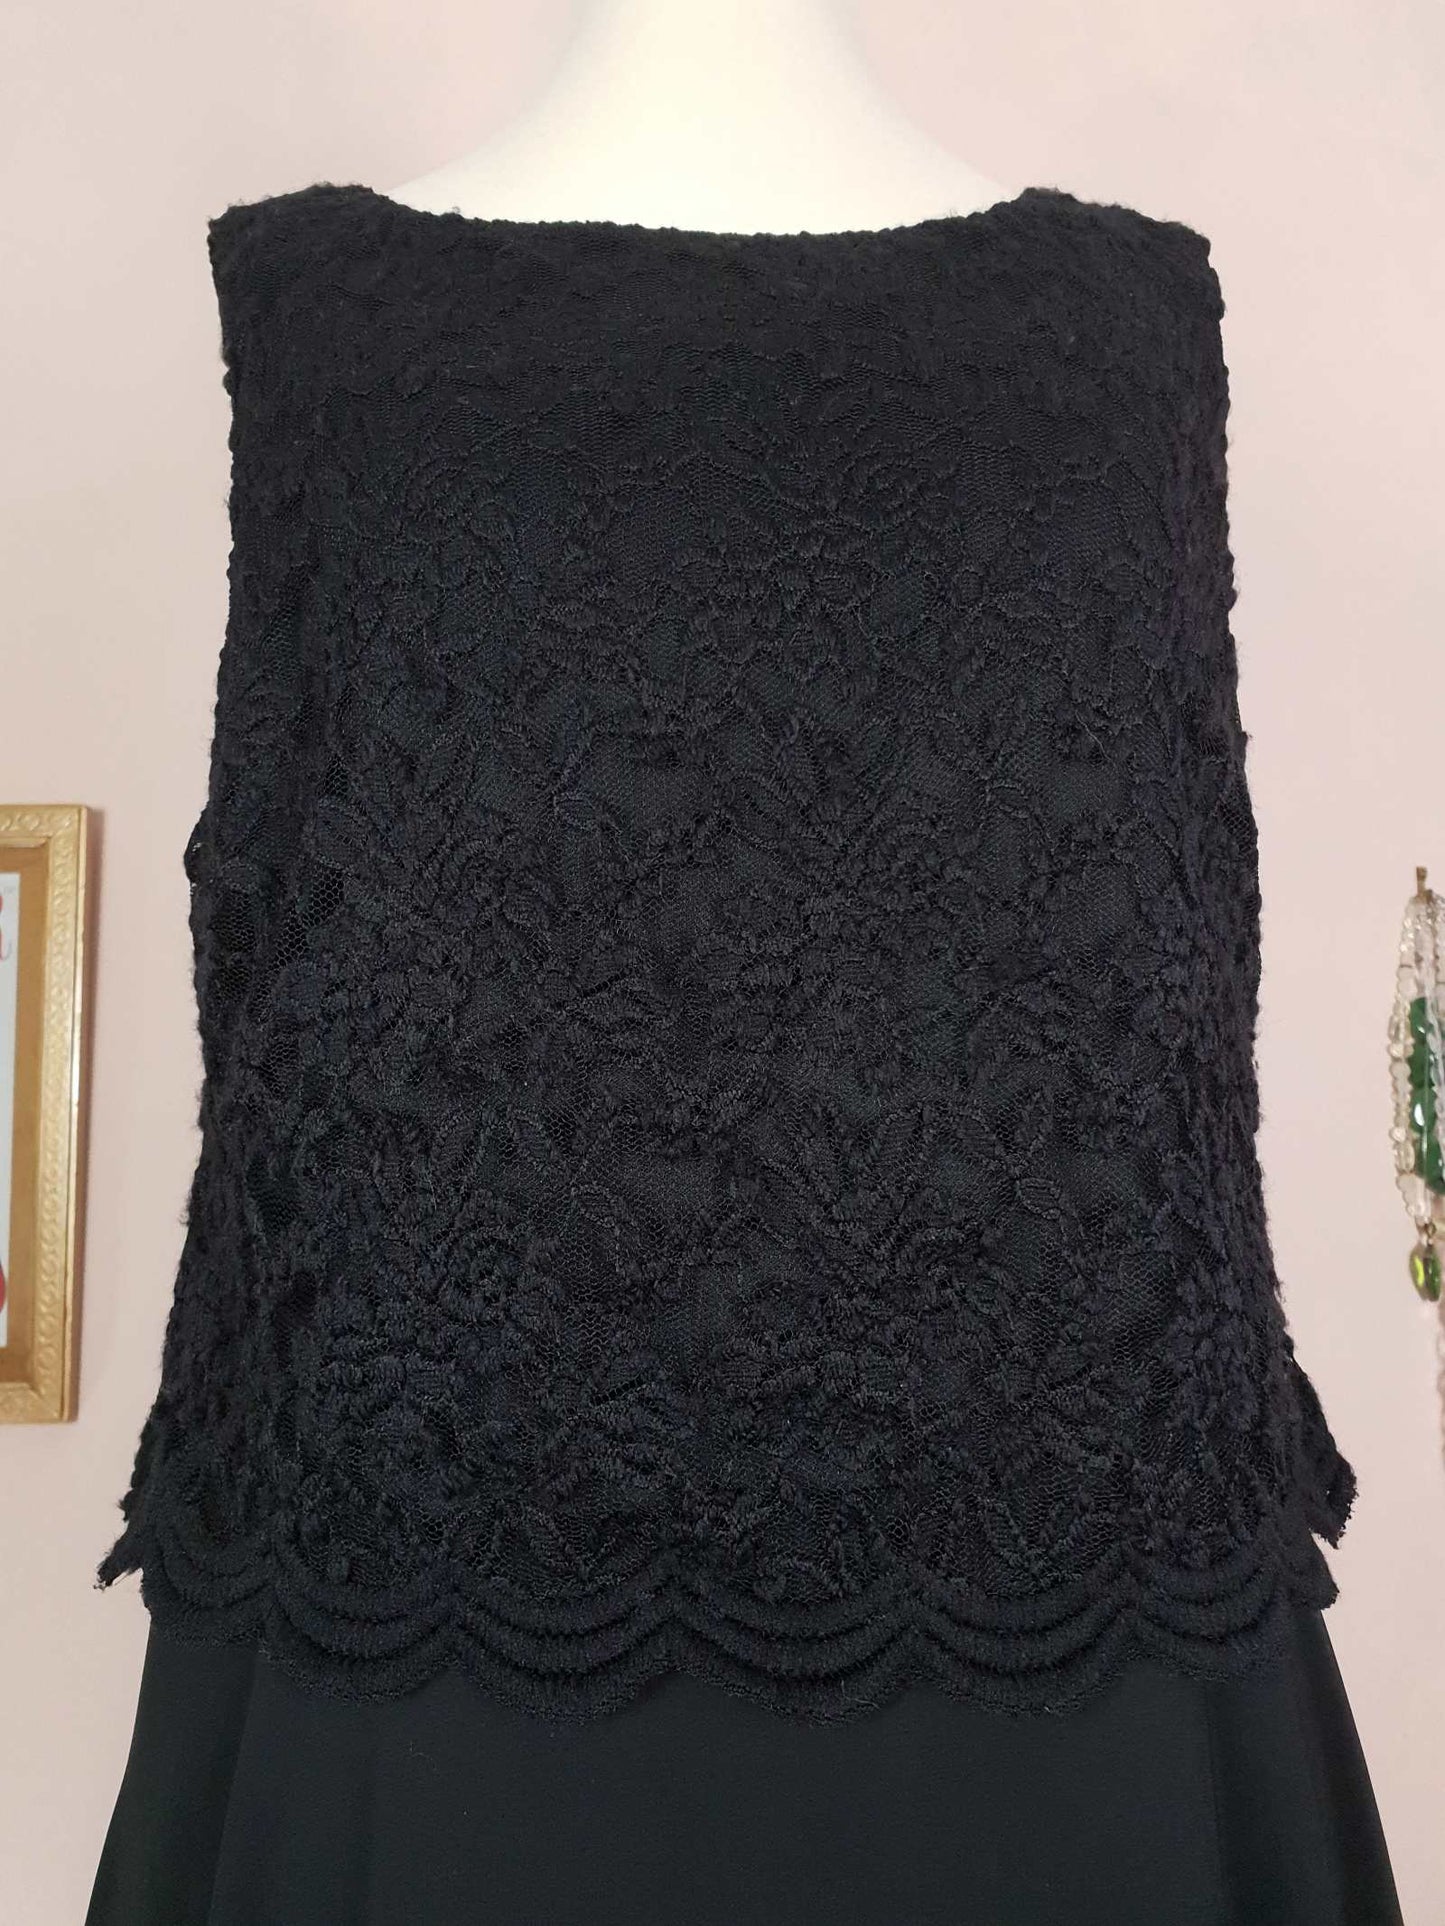 Black Lace & Chiffon Dress Size 12 Party Fit & Flare Midi - Pre-Loved